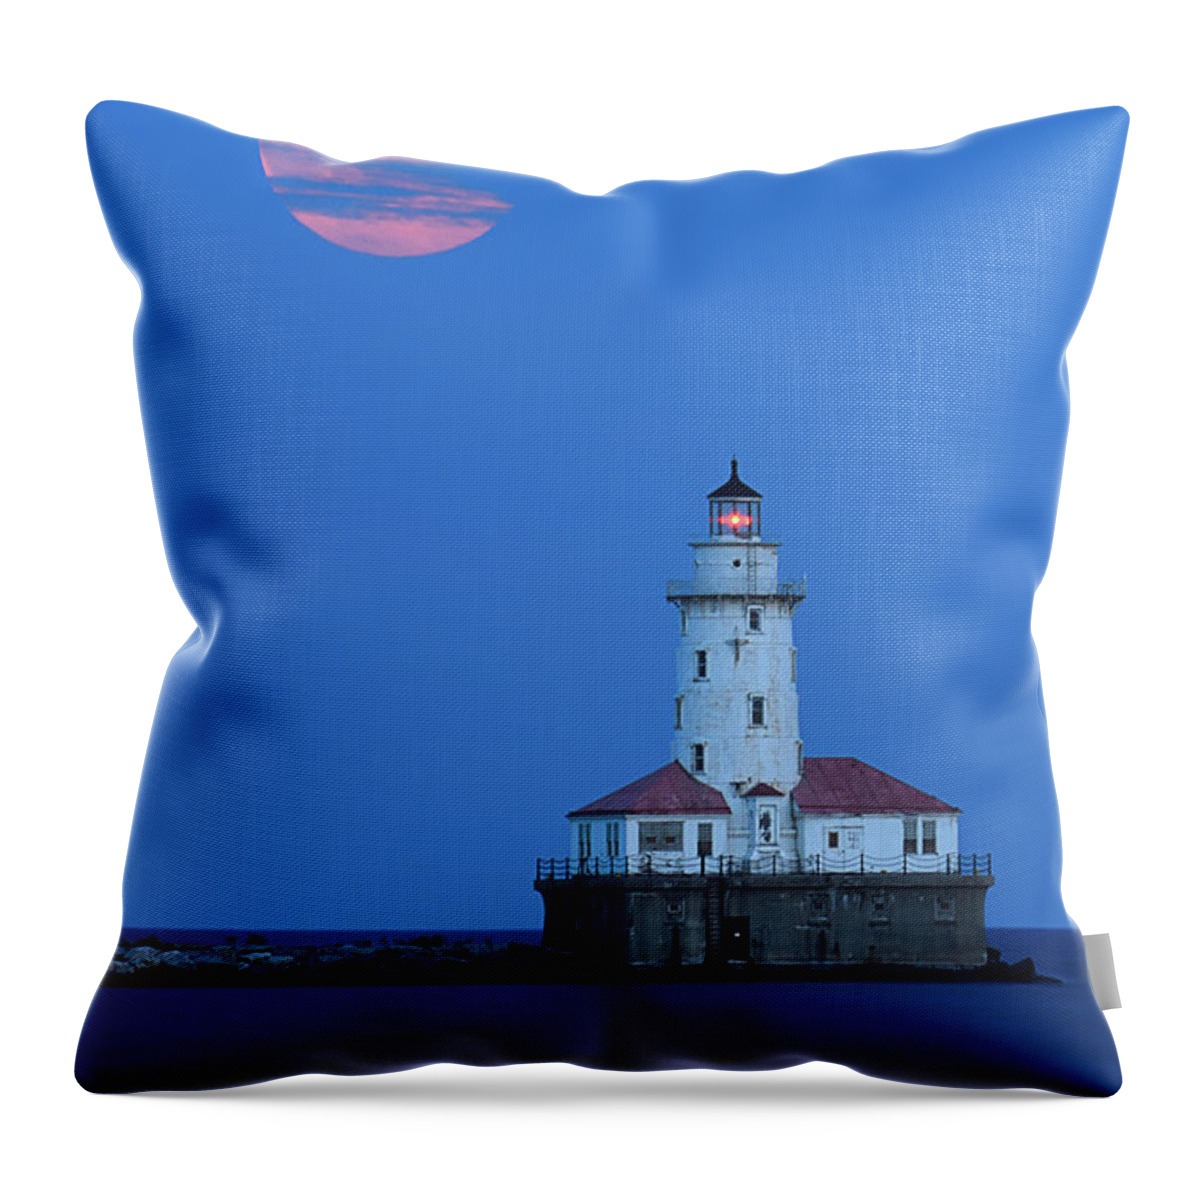 Lake Michigan Throw Pillow featuring the photograph Harvest Moon Over Chicago Harbor by Katherine Gendreau Photography